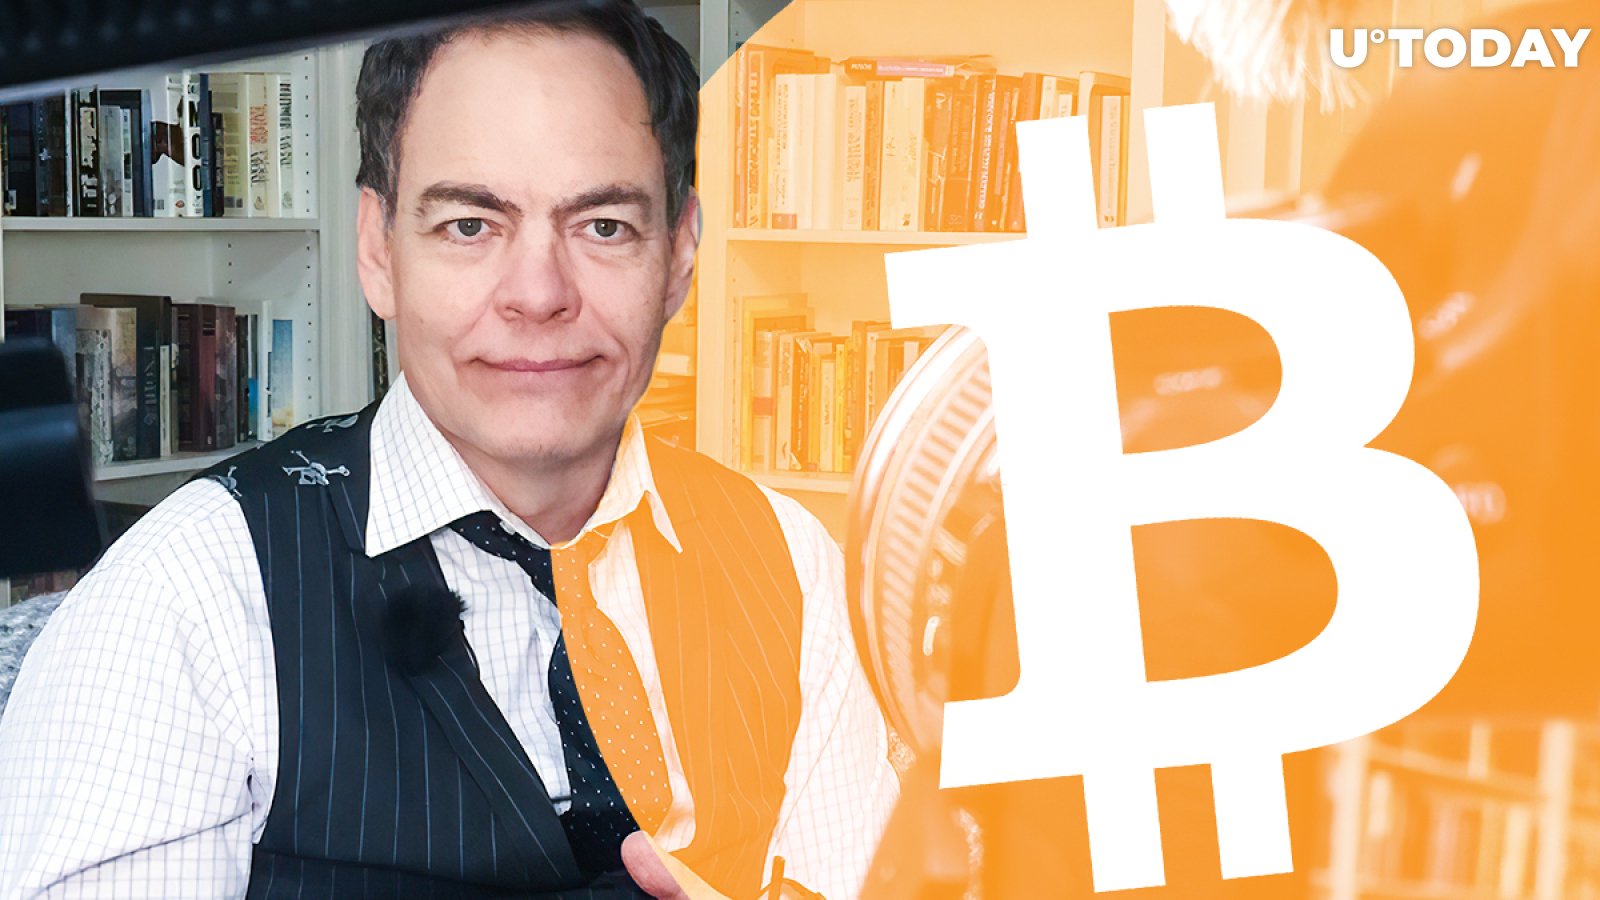 Bitcoin Can Help Environmental Migrants as Global Ecosystem Gets Unpredictable: Max Keiser